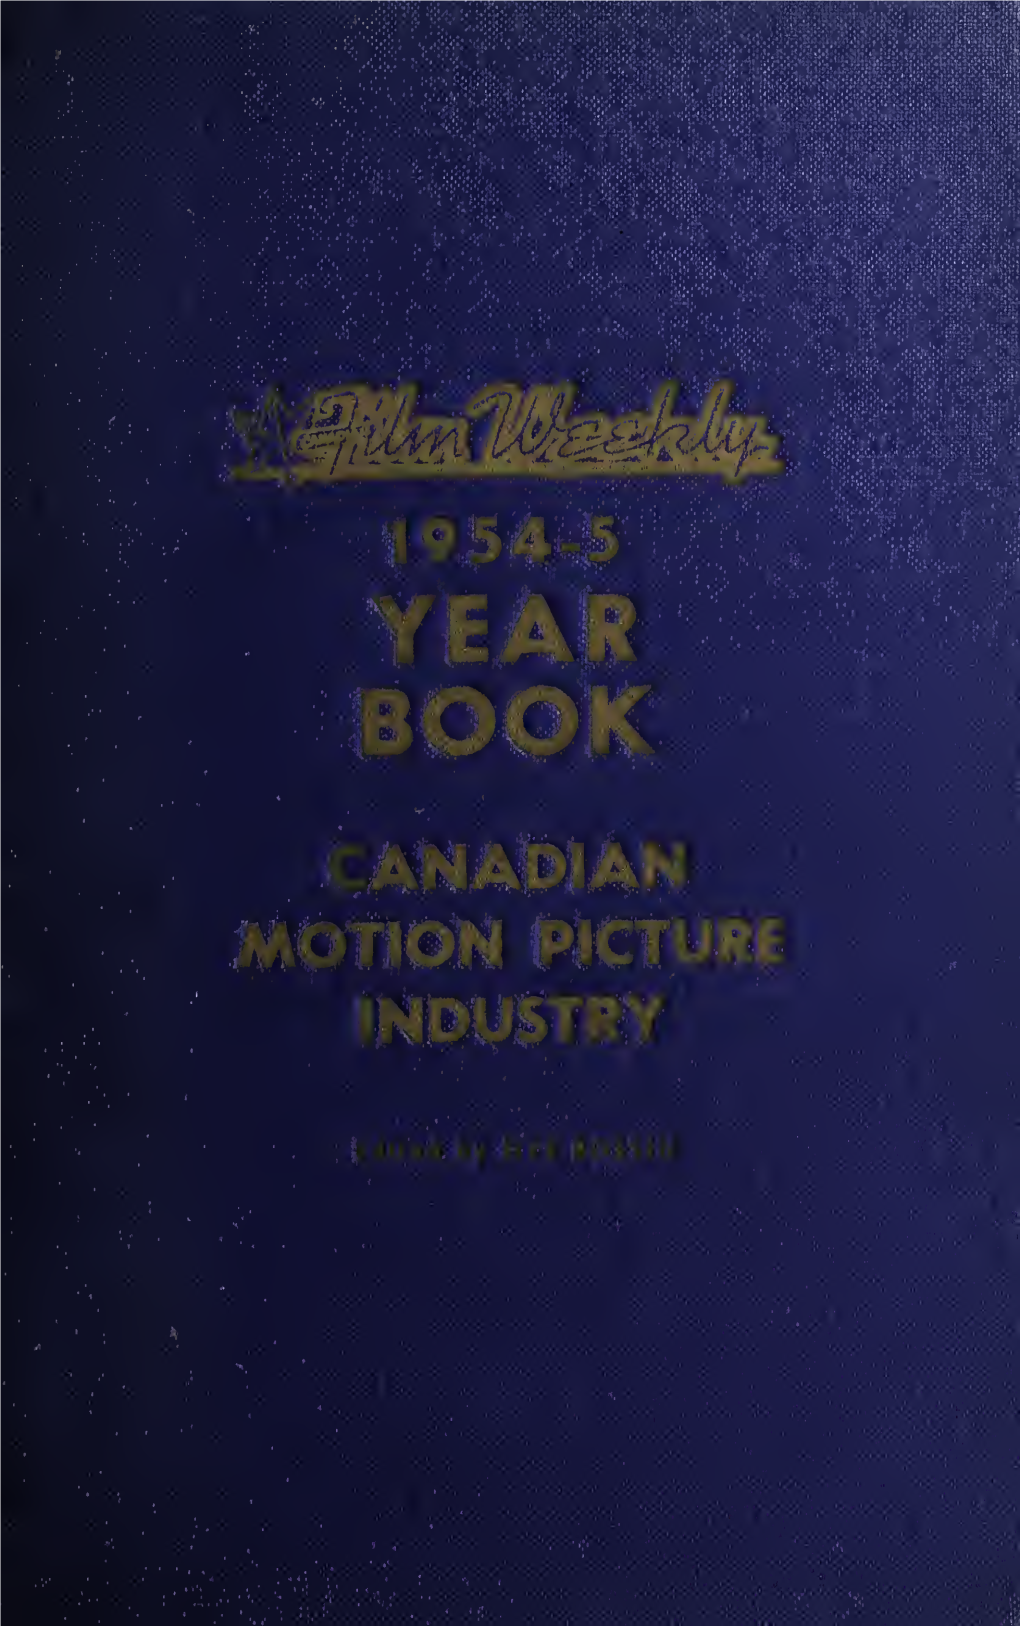 1954-55 Year Book Canadian Motion Picture Industry